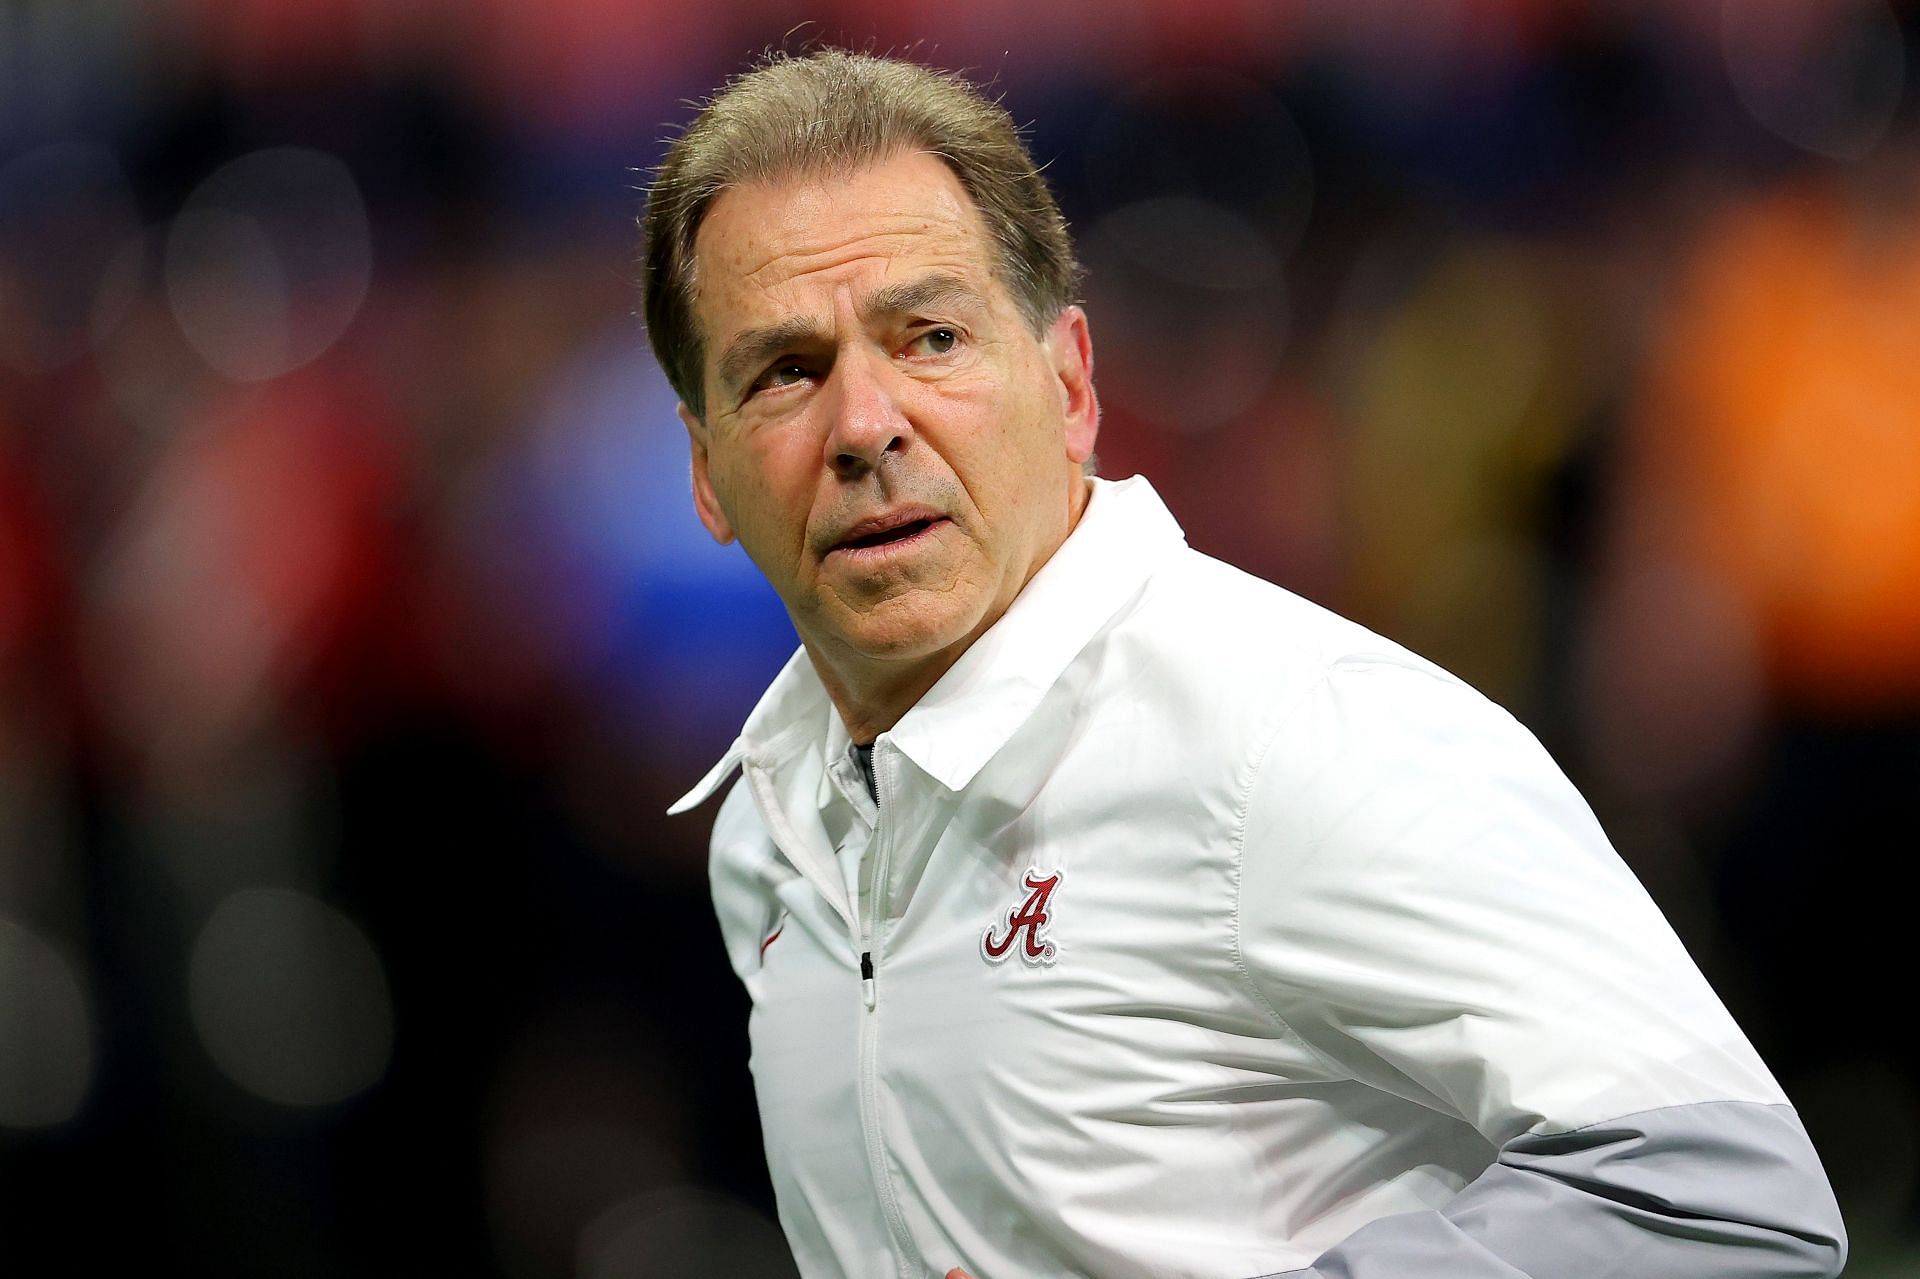 Alabama head coach Nick Saban comes under fire for wild accusations of bribery by other schools